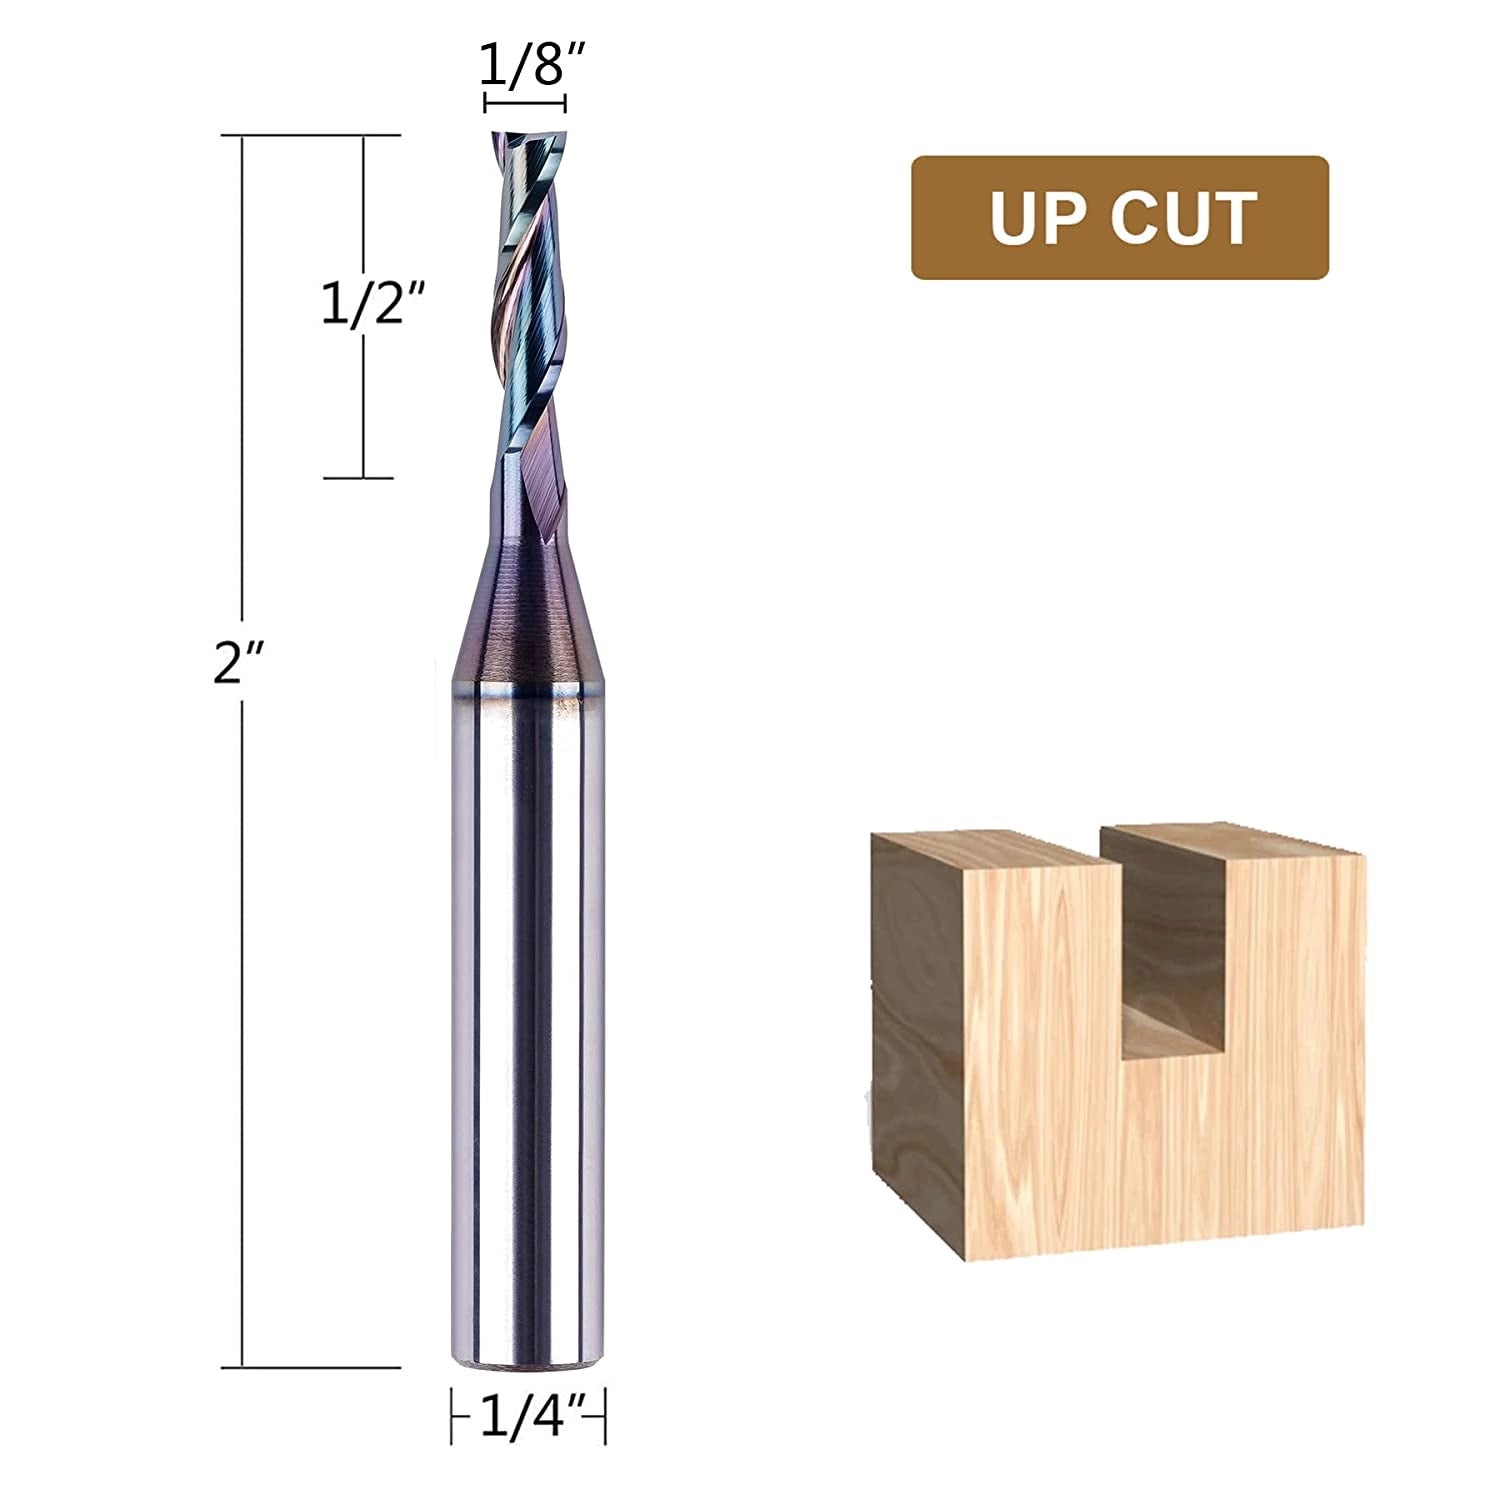 SpeTool Extra Tool Life Coated 1/8 Dia 1/4 Shank Up Cut Router Bit